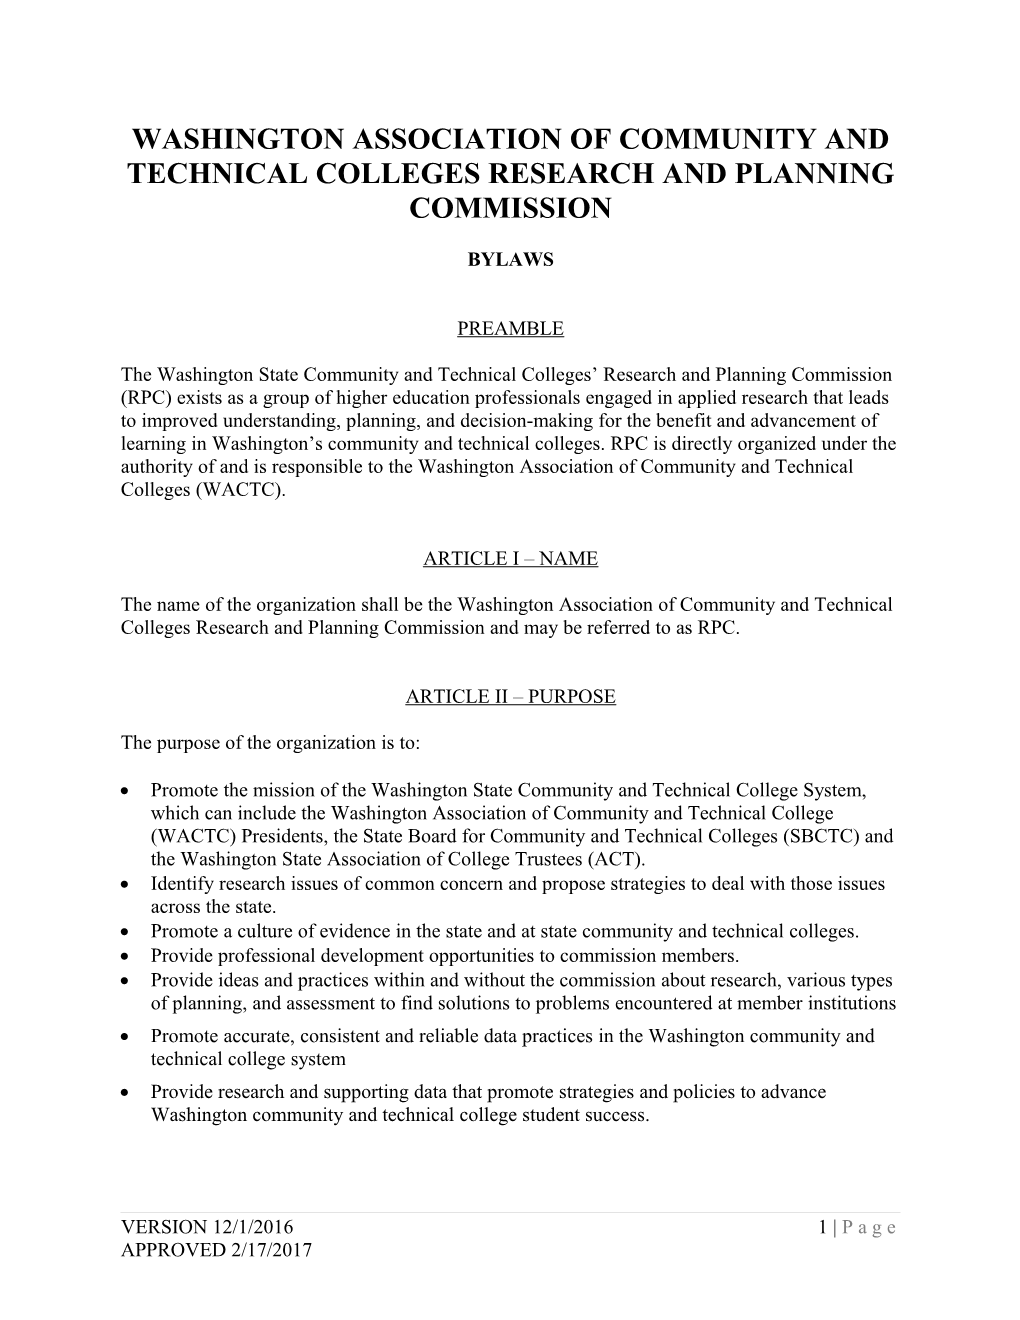 Washington Association of Community and Technical Colleges Research and Planning Commission